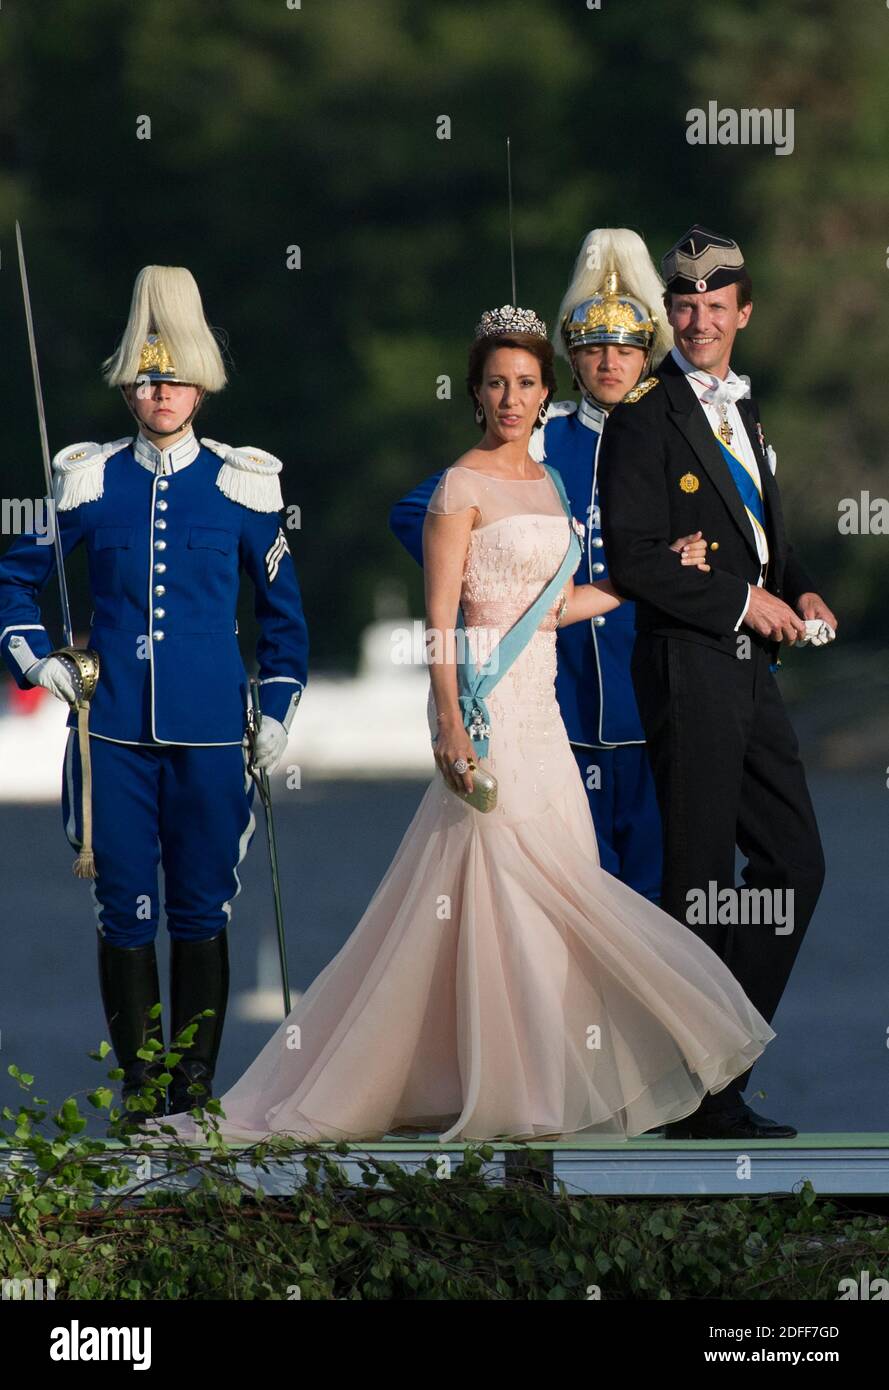 File photo - Prince Joachim and Princess Marie of Danemark travel by boat to Drottningholm Palace for dinner after the wedding ceremony of Princess Madeleine of Sweden and Christopher O'Neill hosted by King Carl Gustaf XIV and Queen Silvia at The Royal Palace on June 8, 2013 in Stockholm, Sweden. Prince Joachim of Denmark is in stable condition after undergoing brain surgery on Friday evening. The 51-year-old royal was admitted to Toulouse University Hospital in France, where he was immediately taken into surgery for a blood clot in his brain, the Royal House announced in a statement. Photo by Stock Photo